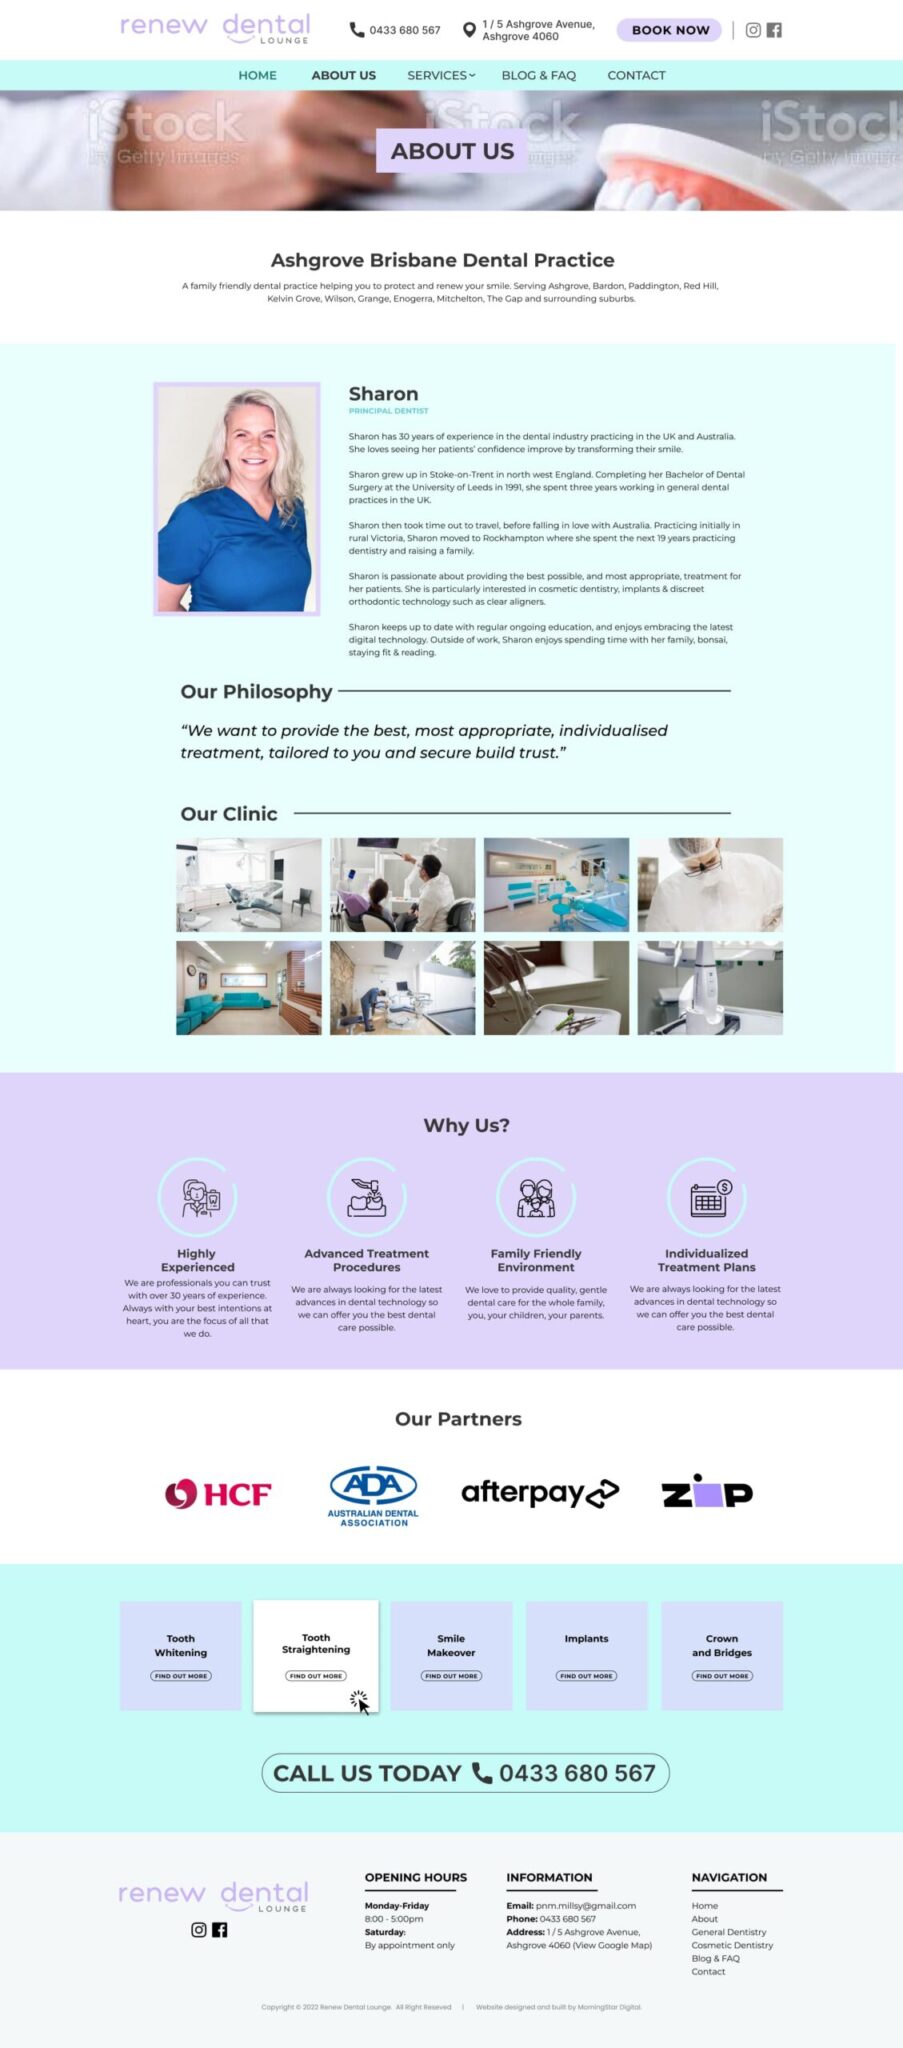 Renew Dental About Us